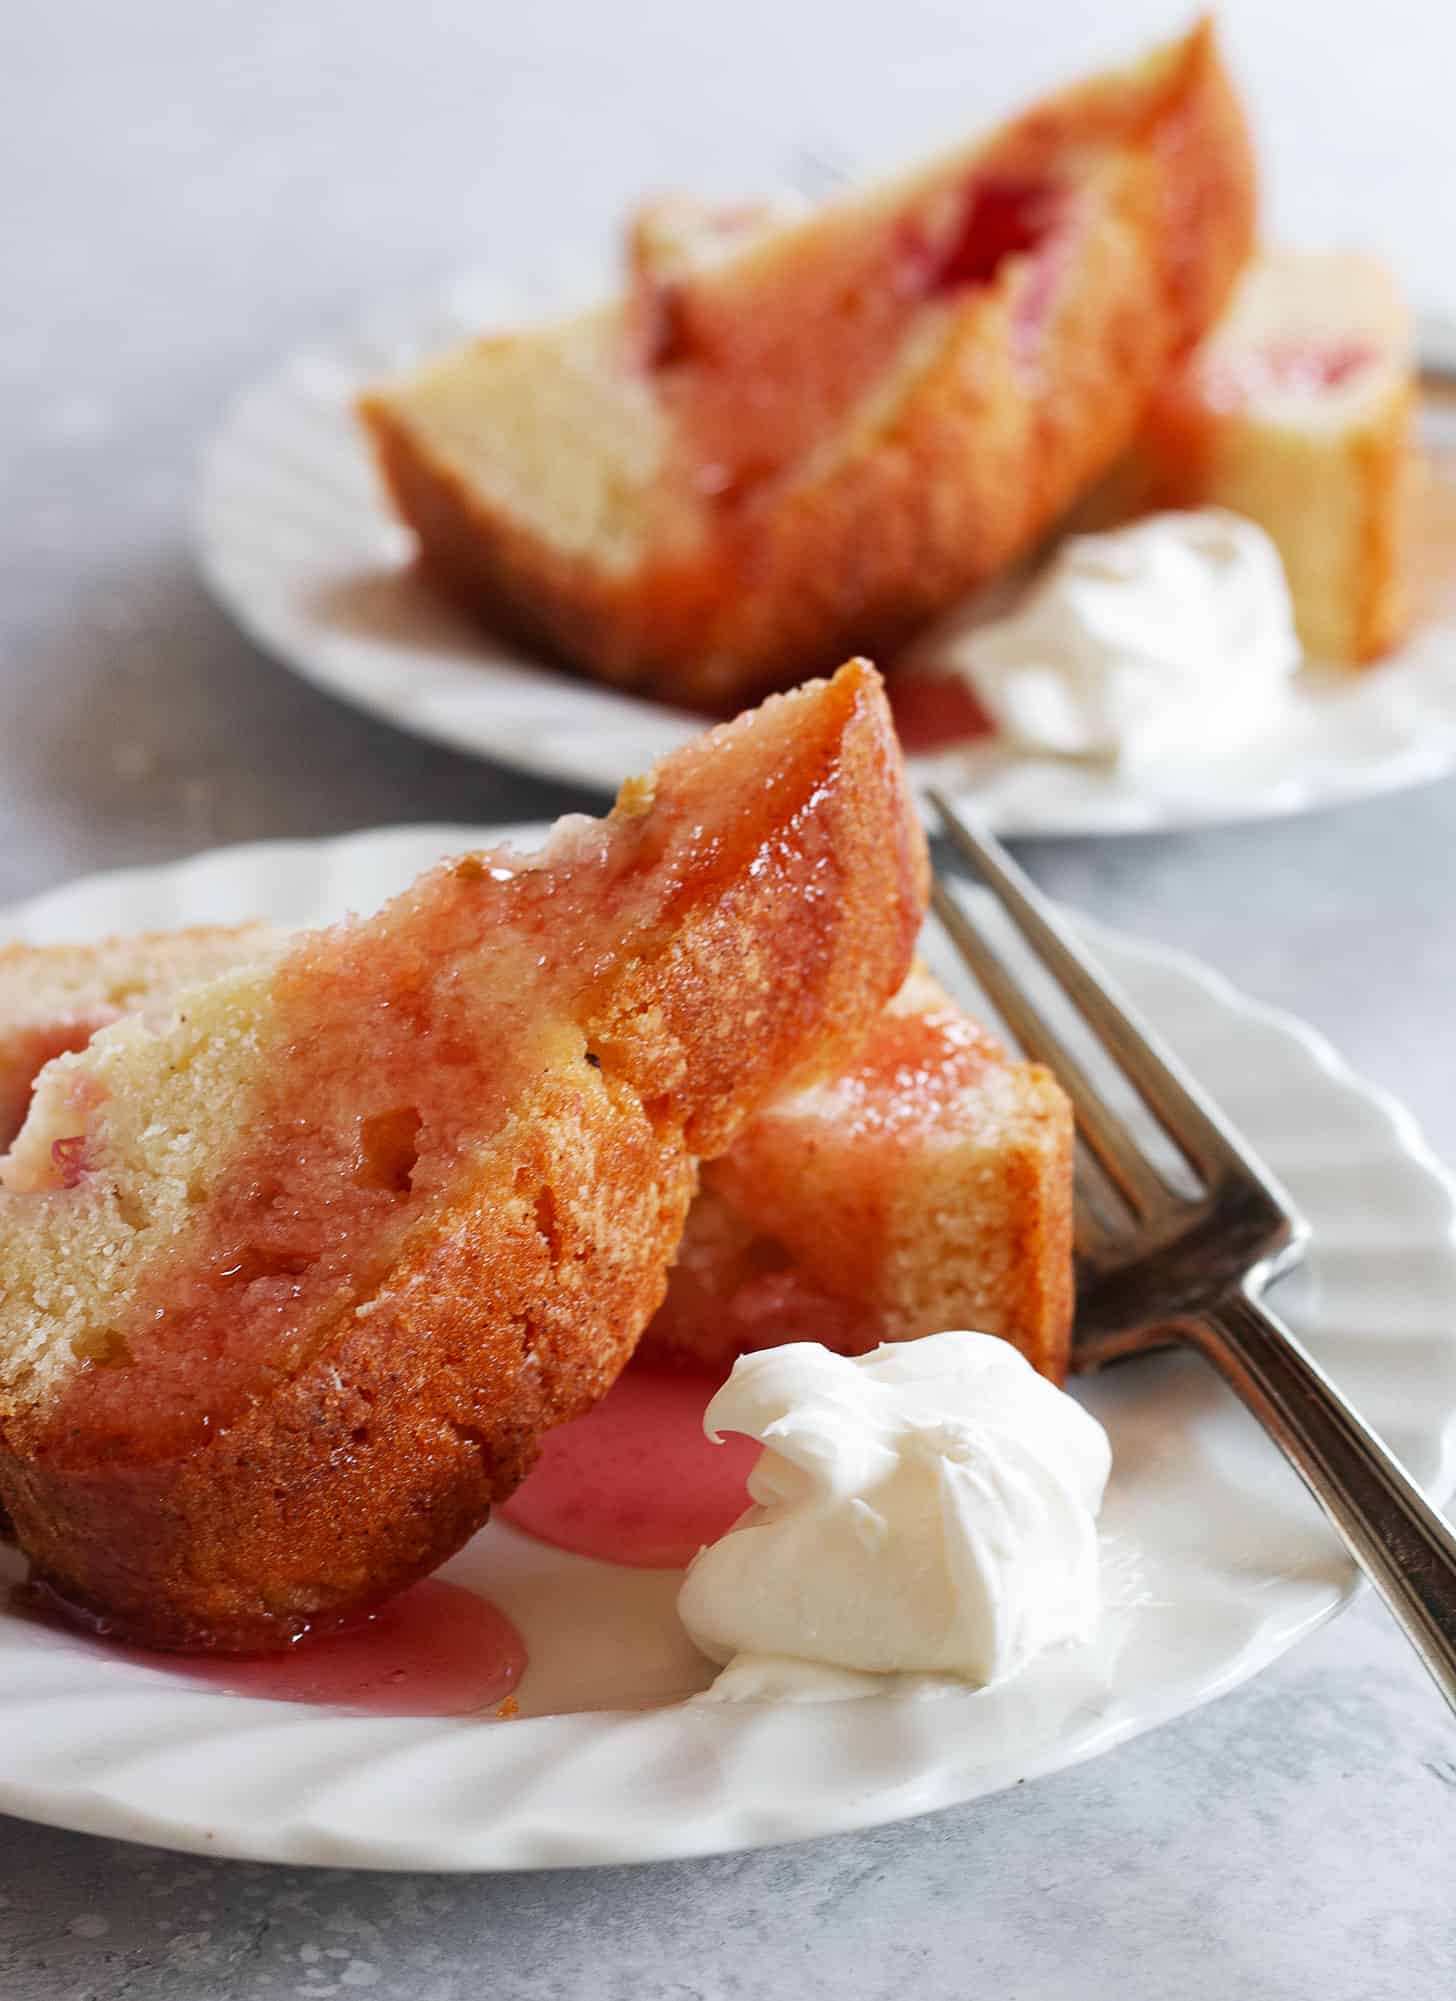 rhubarb loaf cake on plate with fork and whipped cream